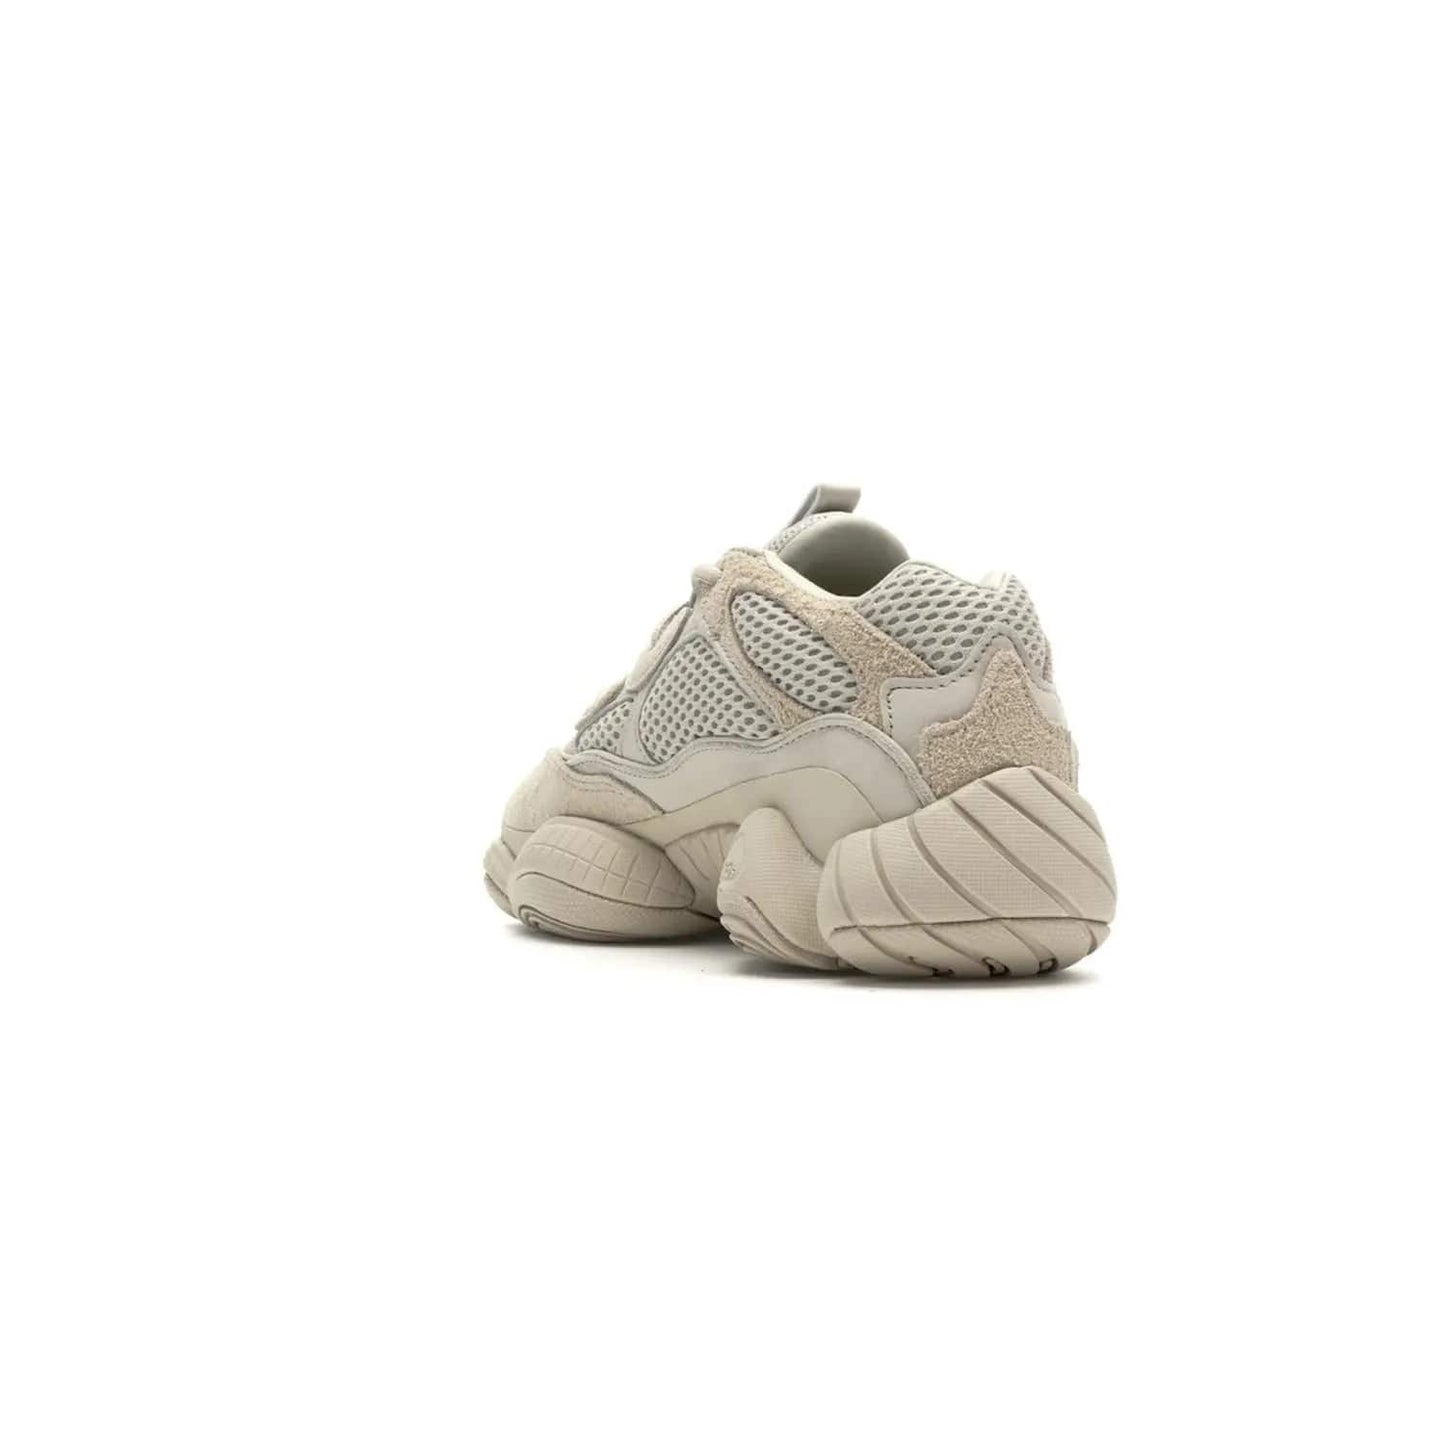 adidas Yeezy 500 Blush - Image 25 - Only at www.BallersClubKickz.com - Step up your sneaker game with the Adidas Yeezy 500 Blush. Monochromatic pale pink palette, hiking-inspired suede/mesh construction, plus adiPRENE sole for comfort and performance. Get the Adidas Yeezy 500 and experience true style and comfort.